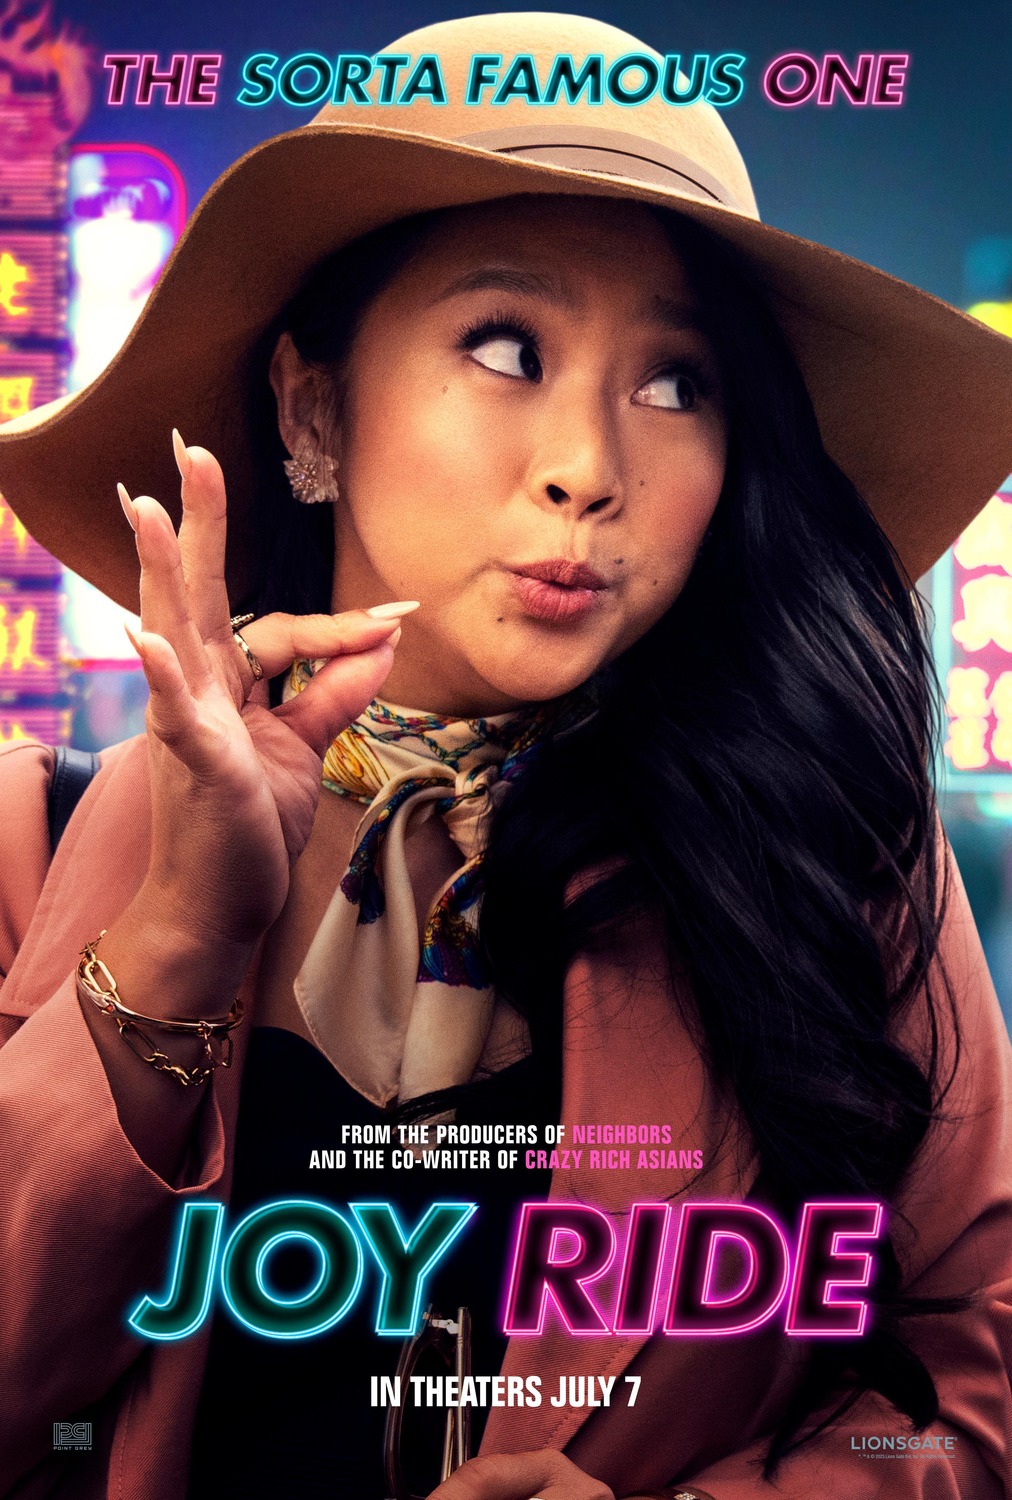 JOY RIDE (2023) Trailers, Clips, Images and Posters The